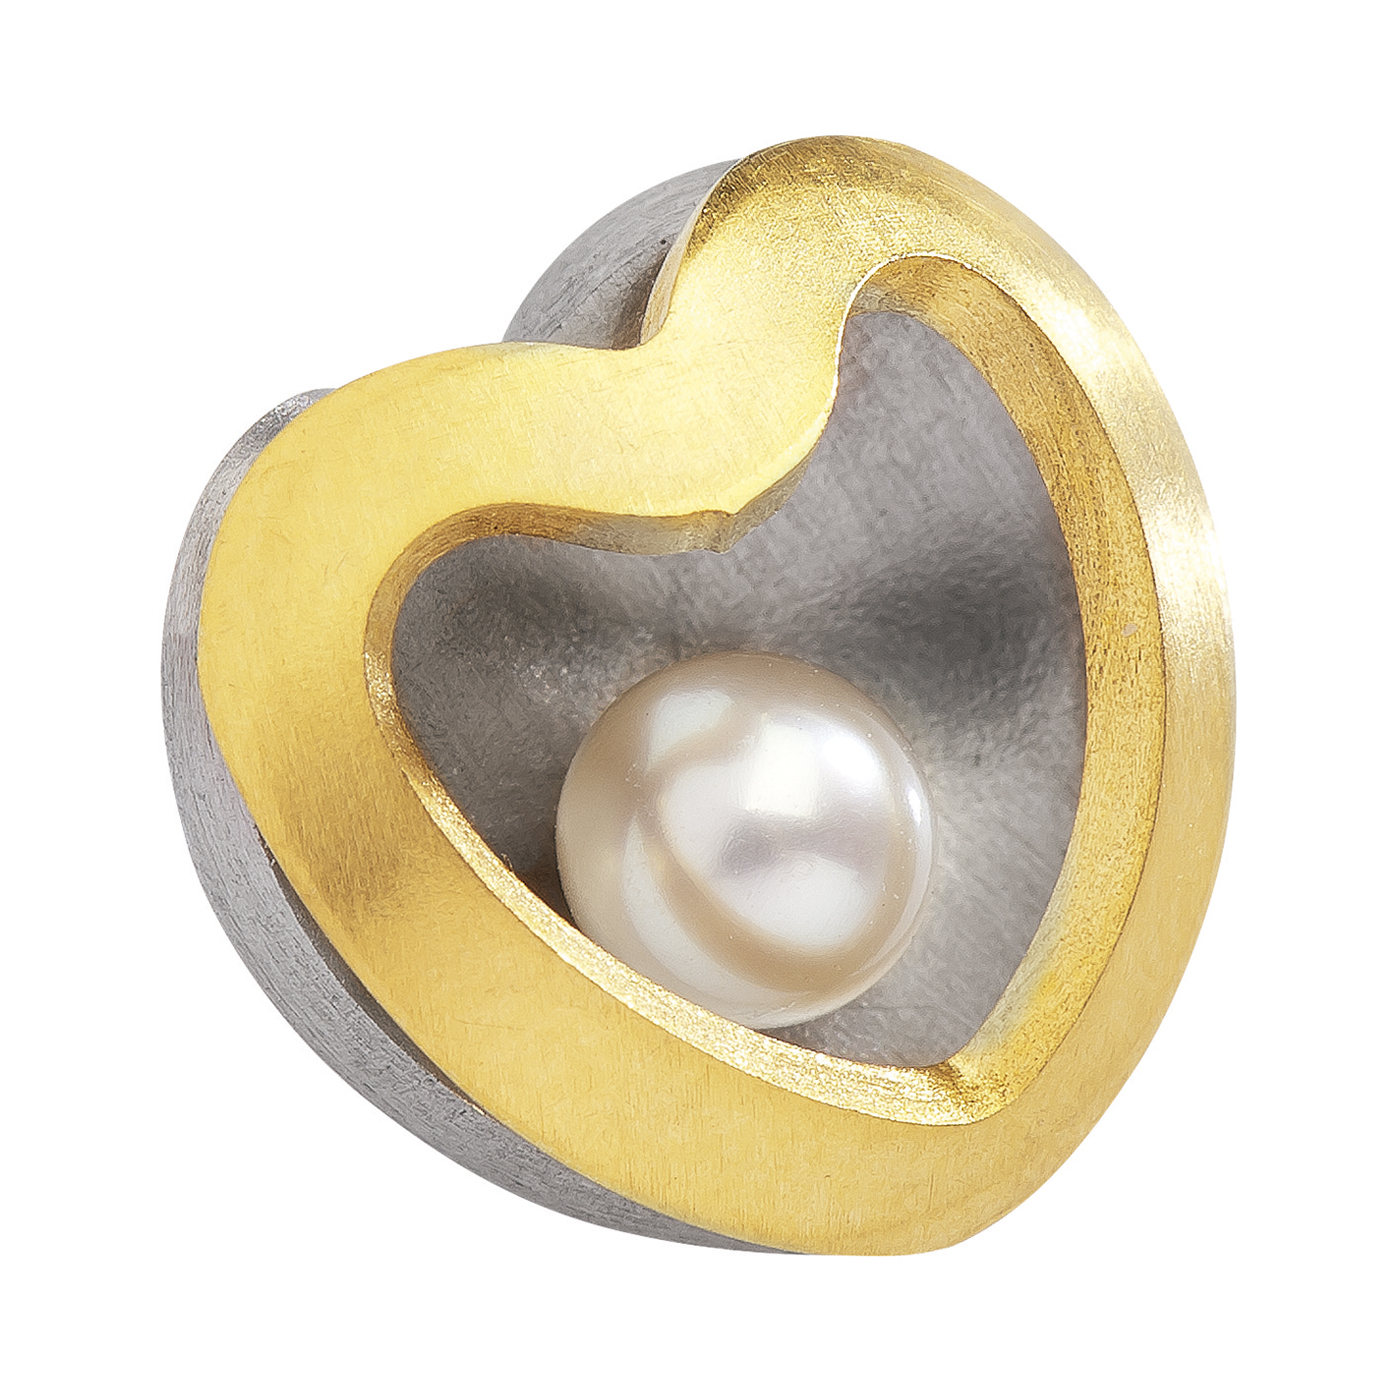 Pendant Heart with Pearl, Stainless Steel/Gold-Pl., 12 mm - 1 piece